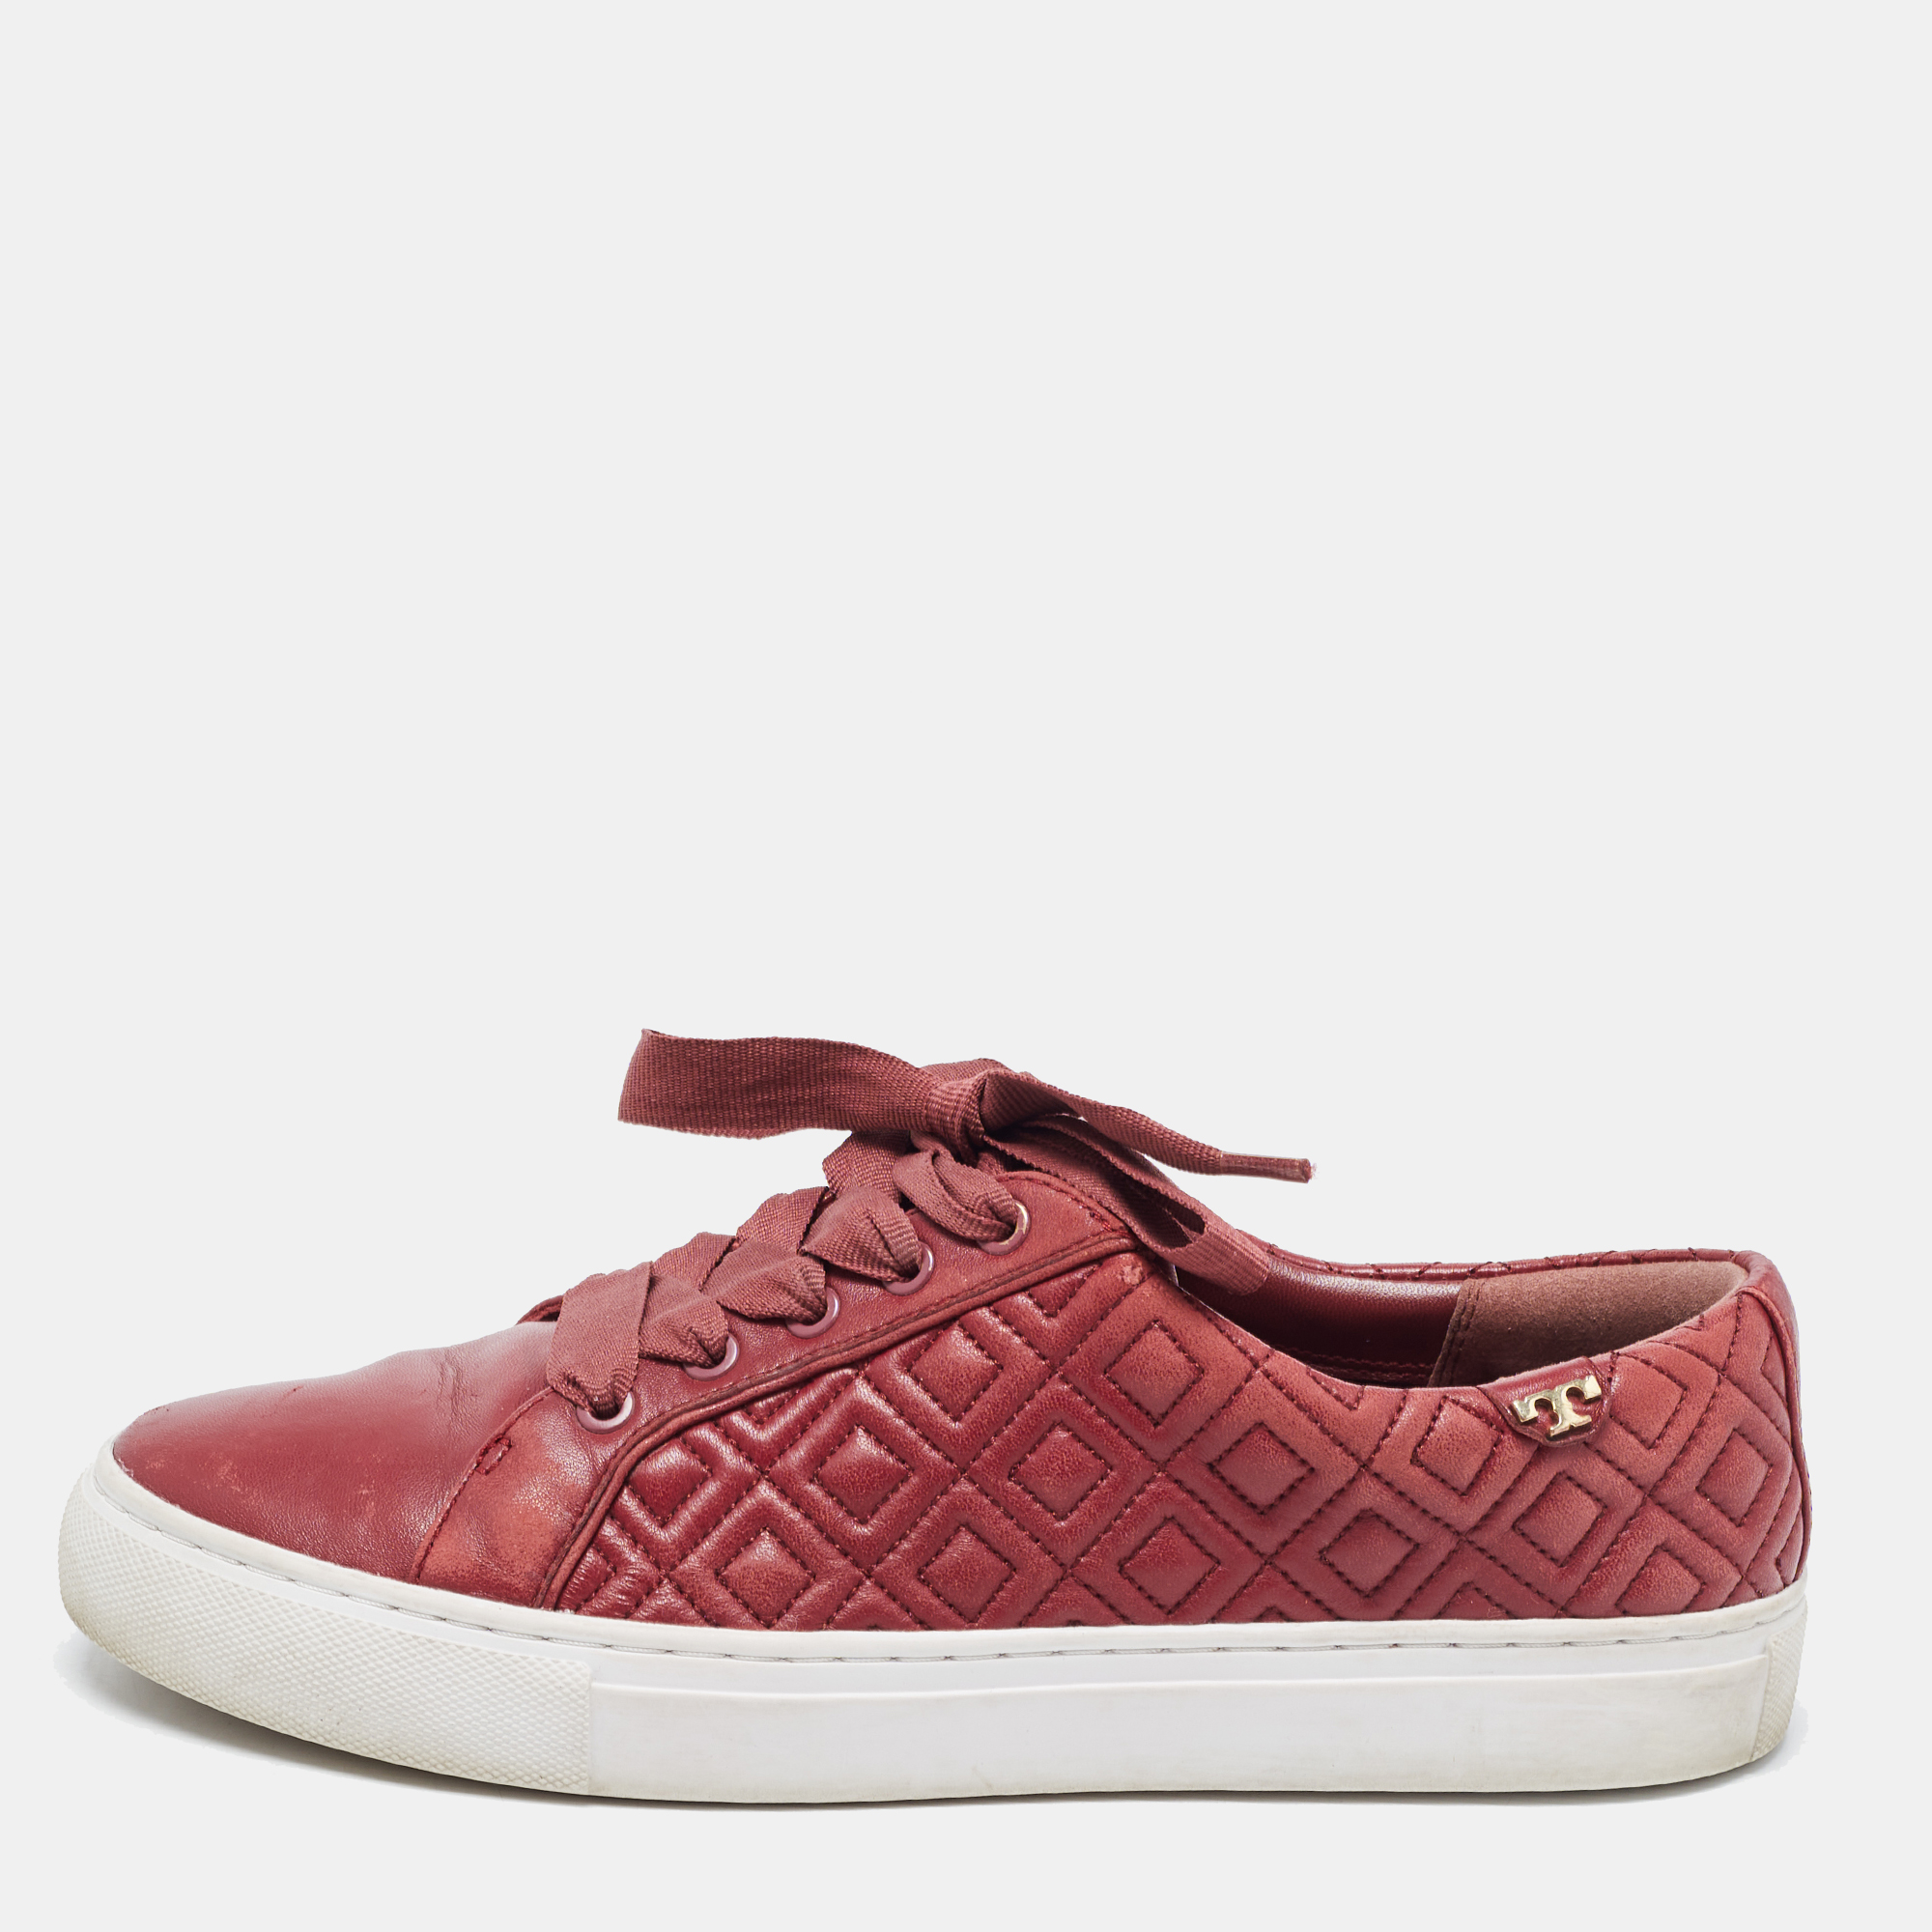 Tory Burch Red Quilted Leather Marion Lace Up Sneakers Size 38